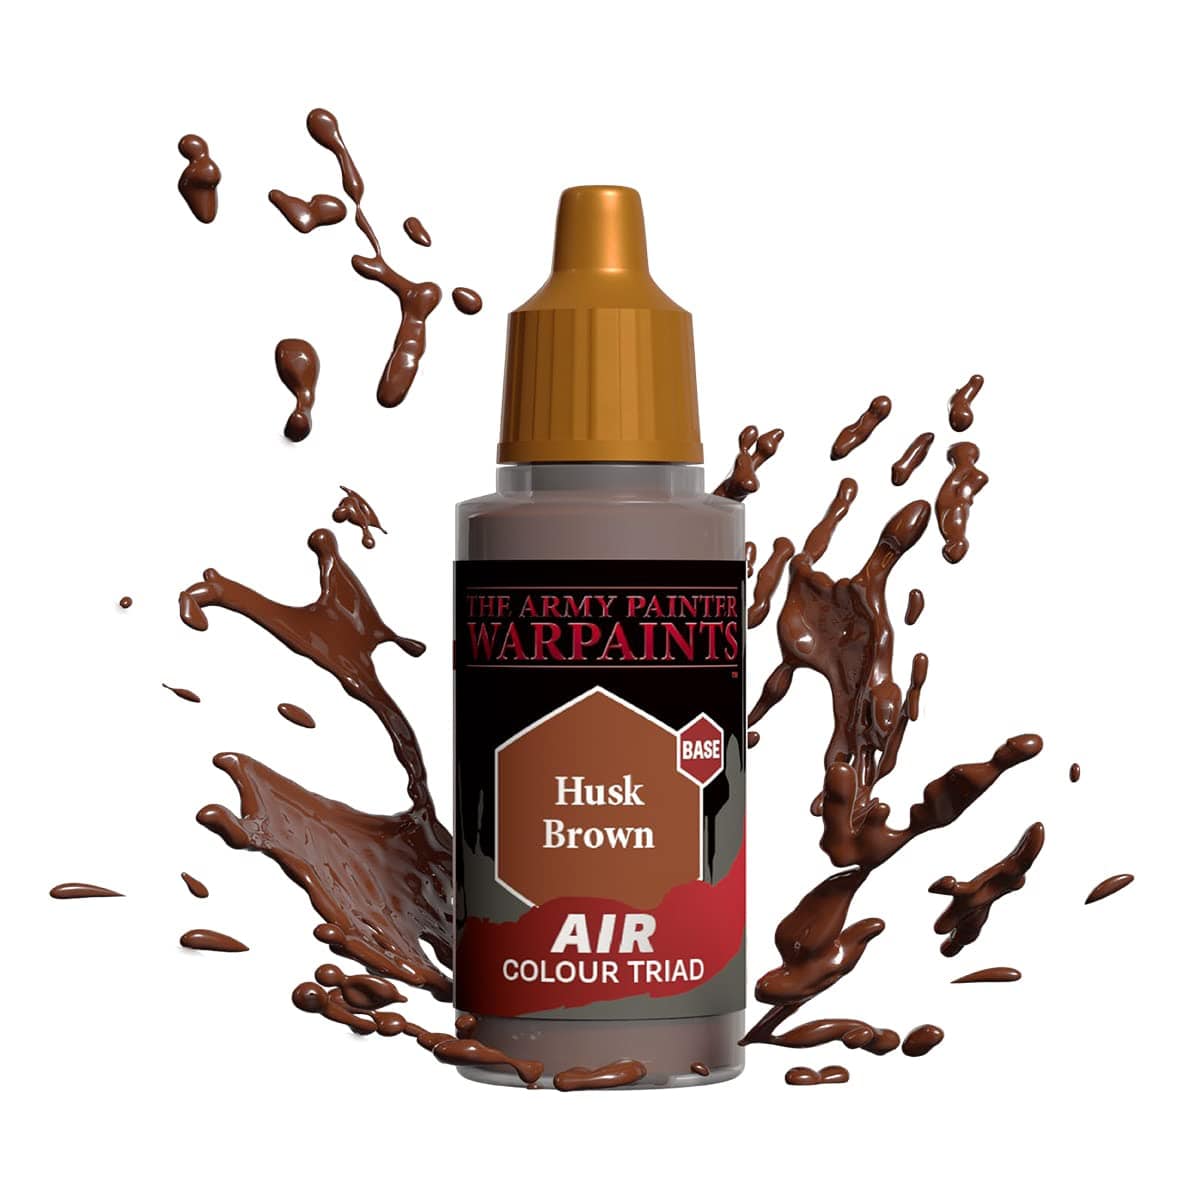 The Army Painter Accessories The Army Painter Warpaints Air: Husk Brown 18ml